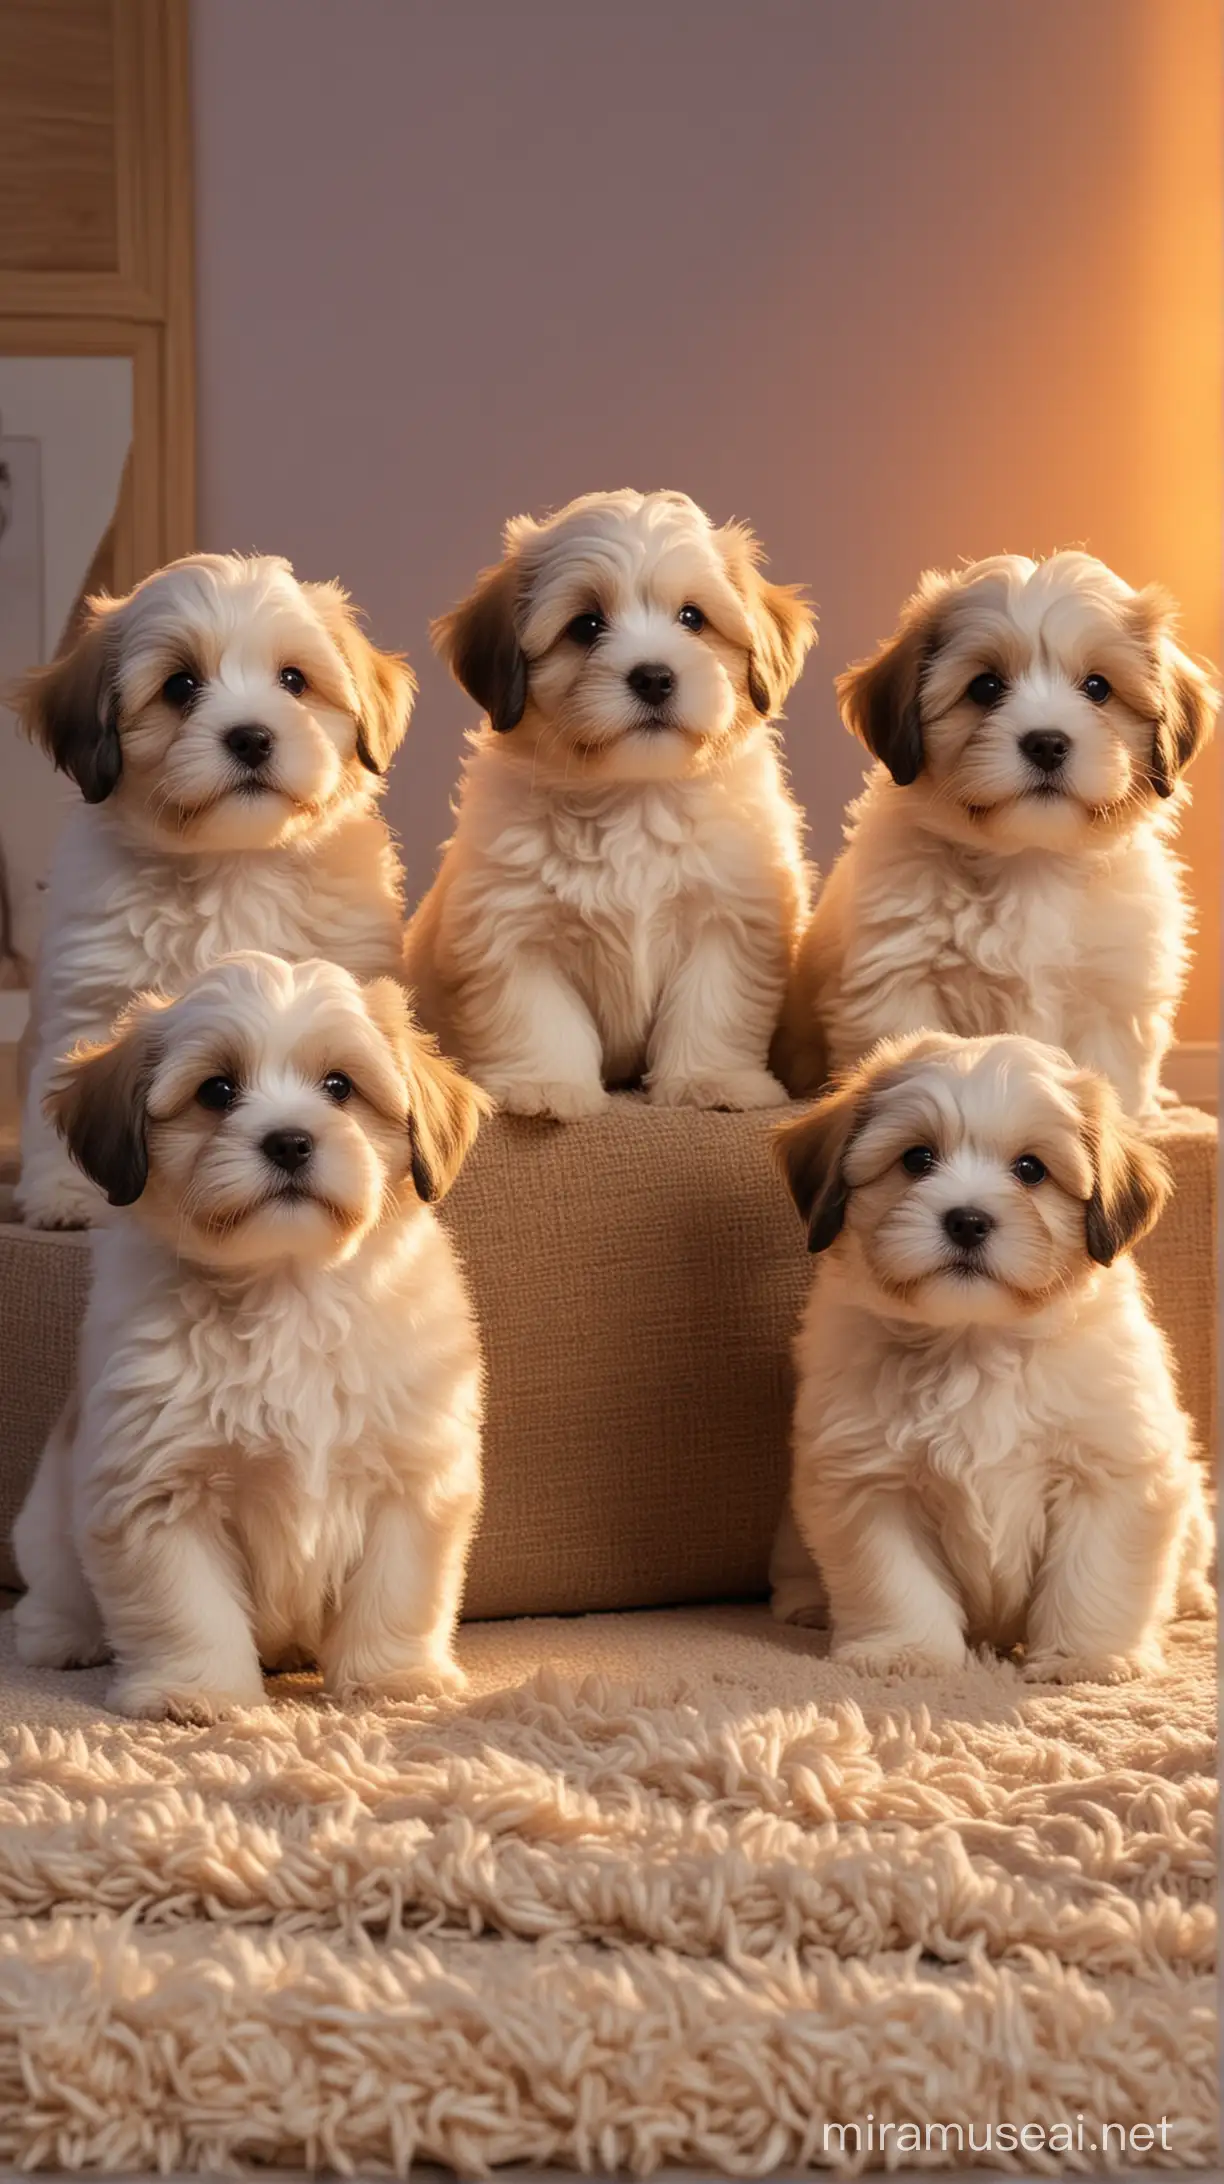 5 cute havanese puppies sitting in a cozy apartment with magical sunset light in the background